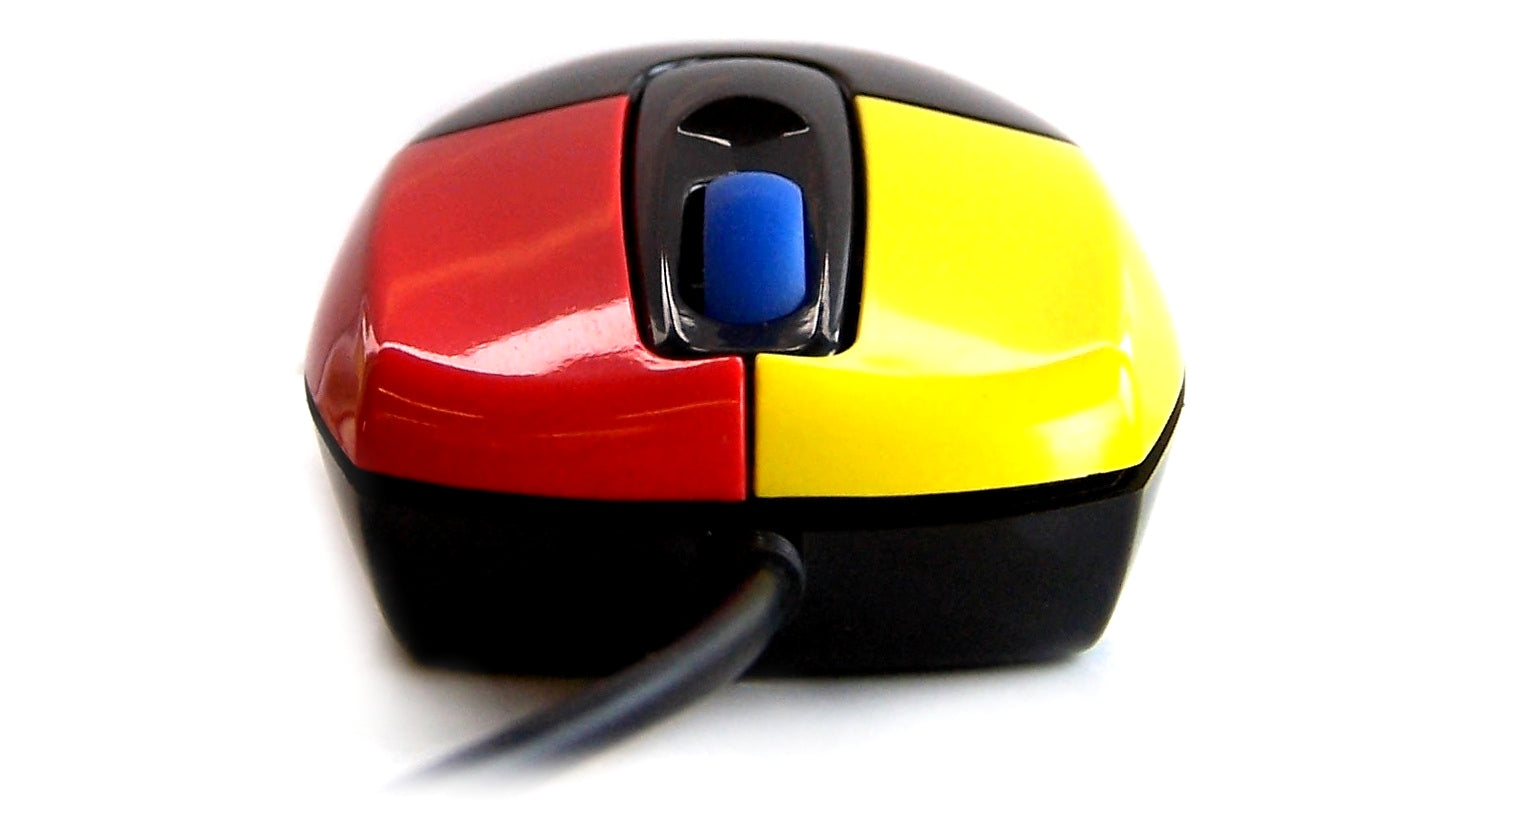 Accuratus Junior Mouse - USB Medium Sized Junior Antibacterial Mouse with Coloured Easy Learn Buttons & Scroll Wheel